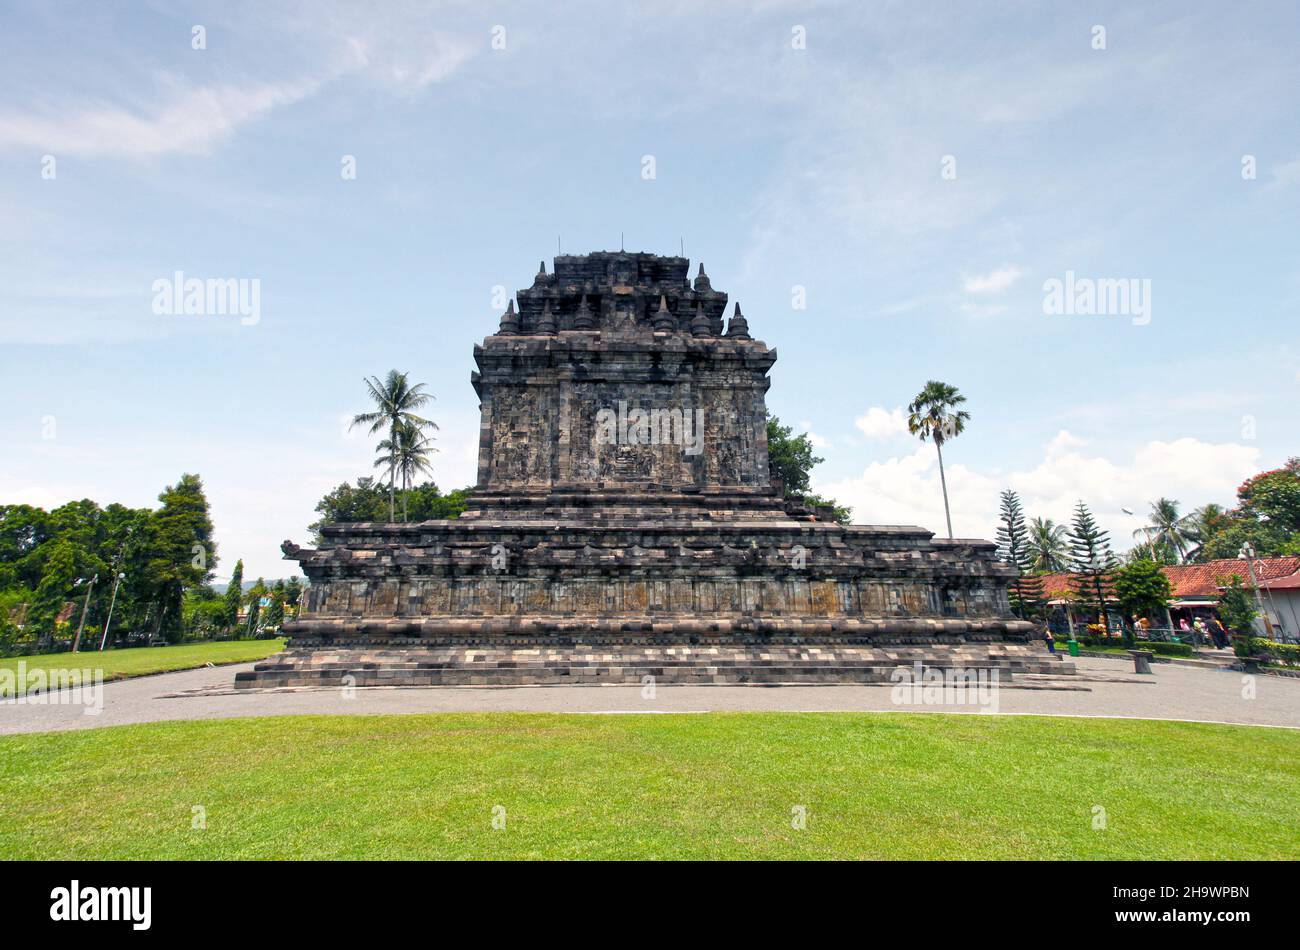 The gardens at the Mendut Temple in Mendut village in Magelang built in the 9th Century AD in Central Java, Indonesia. Stock Photo